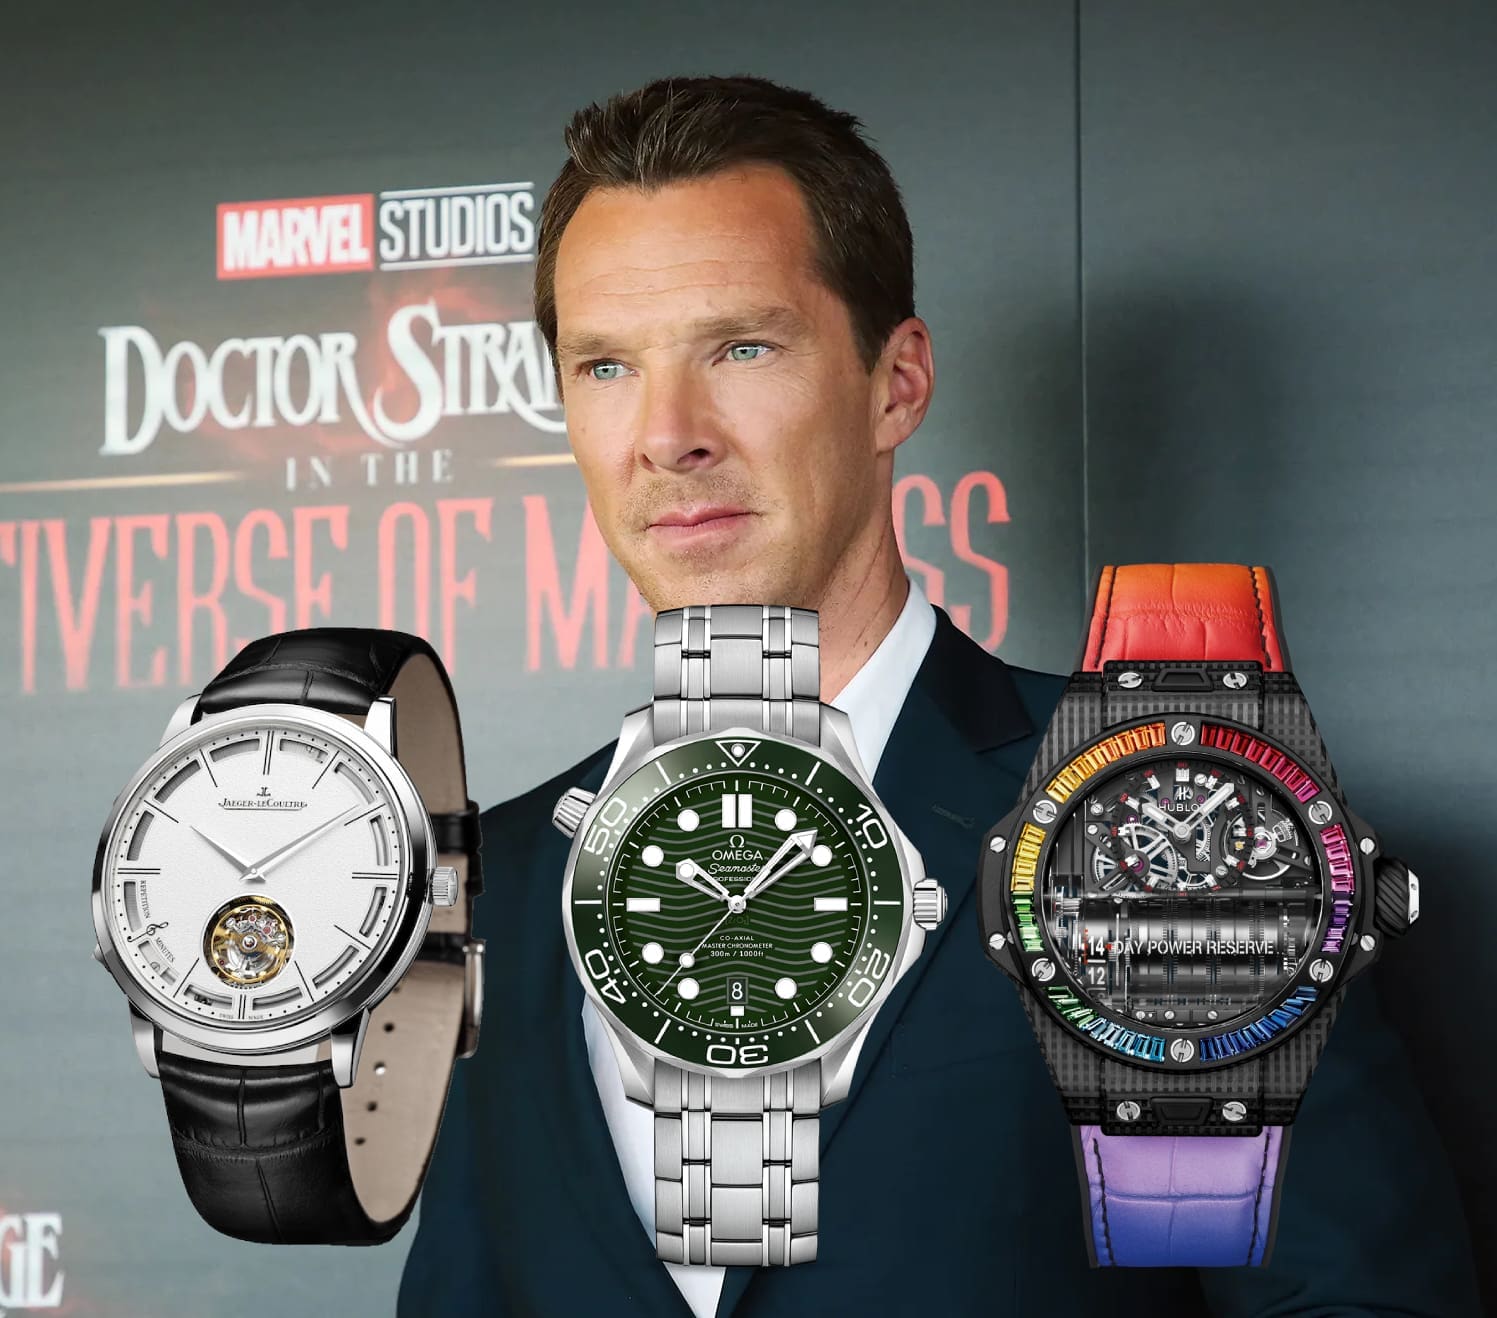 The Benetict Cumberwatches: Why so many watches have overcomplicated names